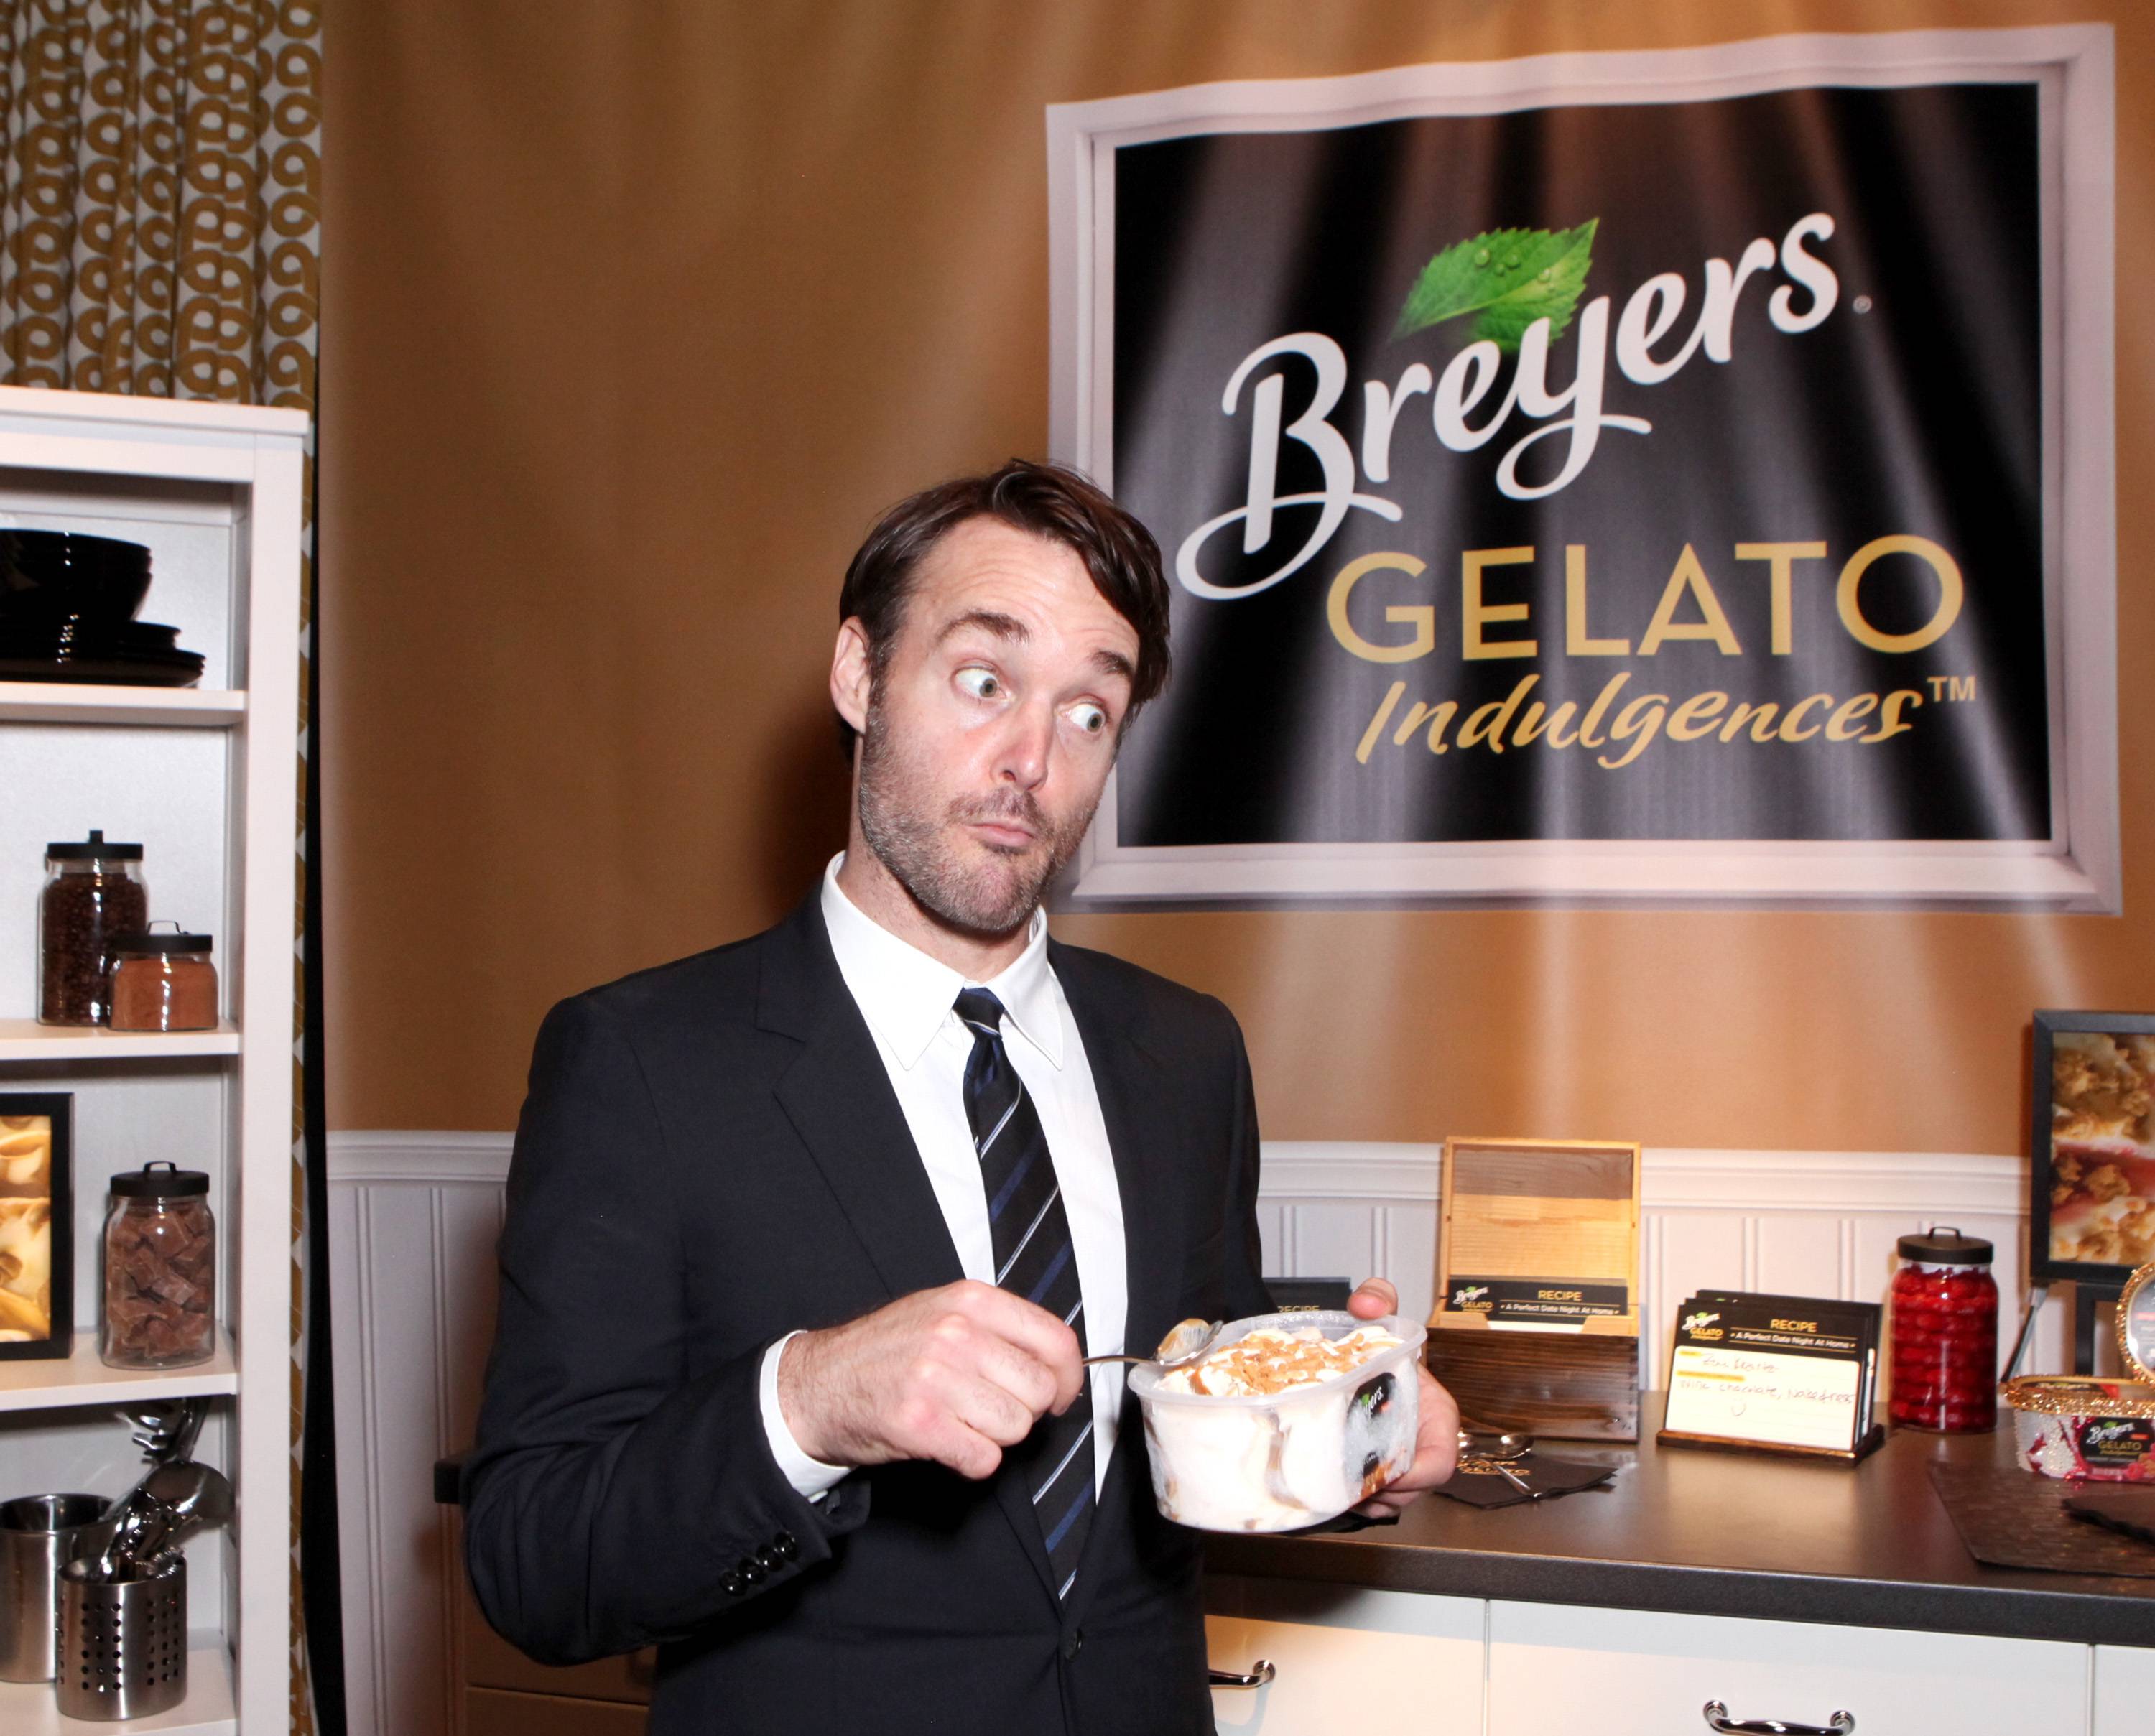 Breyers Gelato Indulgences In The Official Presenter Gift Lounge at The 2014 Film Independent Spirit Awards Produced by On 3 Productions